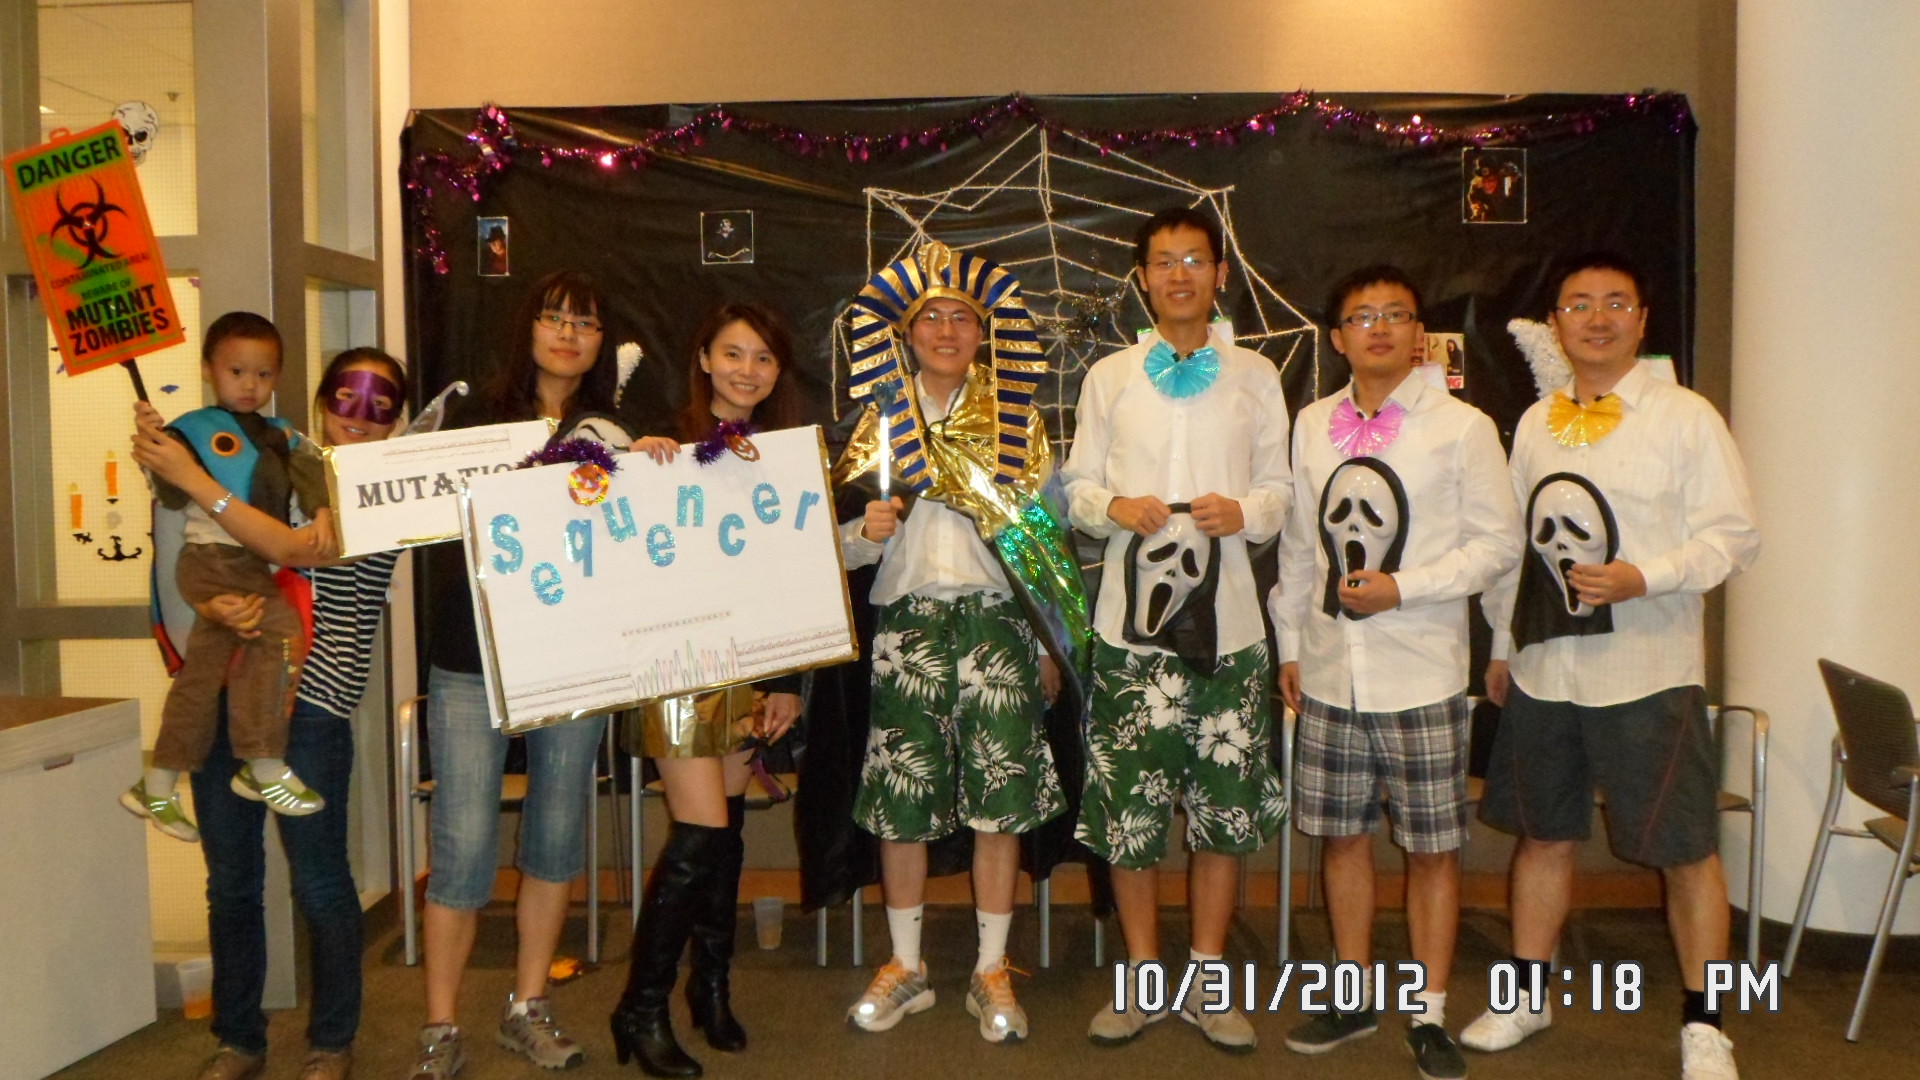 We won Halloween costume competition (2012)